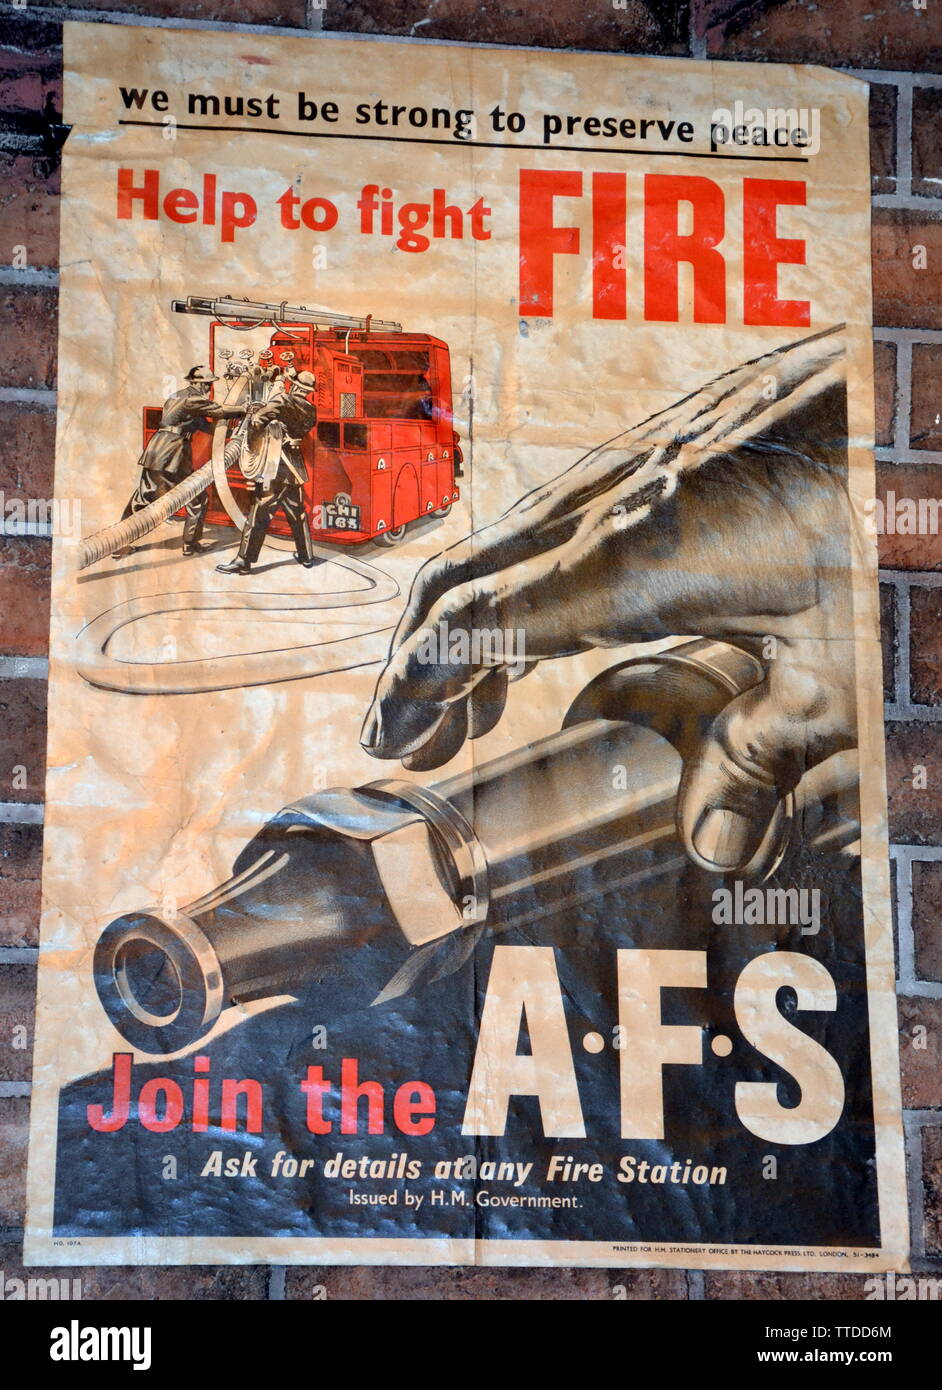 Poster for the Auxiliary Fire Service, 1940s wartime. The Greater Manchester Fire Service Museum, in Rochdale, uk, is planning to start  construction work at its new location, the adjacent former Maclure Road fire station, later this year .The building will be fully restored to its 1930s condition by late 2020. The move to larger premises means that full-sized fire engines can be displayed, alongside many fascinating historic items of firefighting equipment. Stock Photo